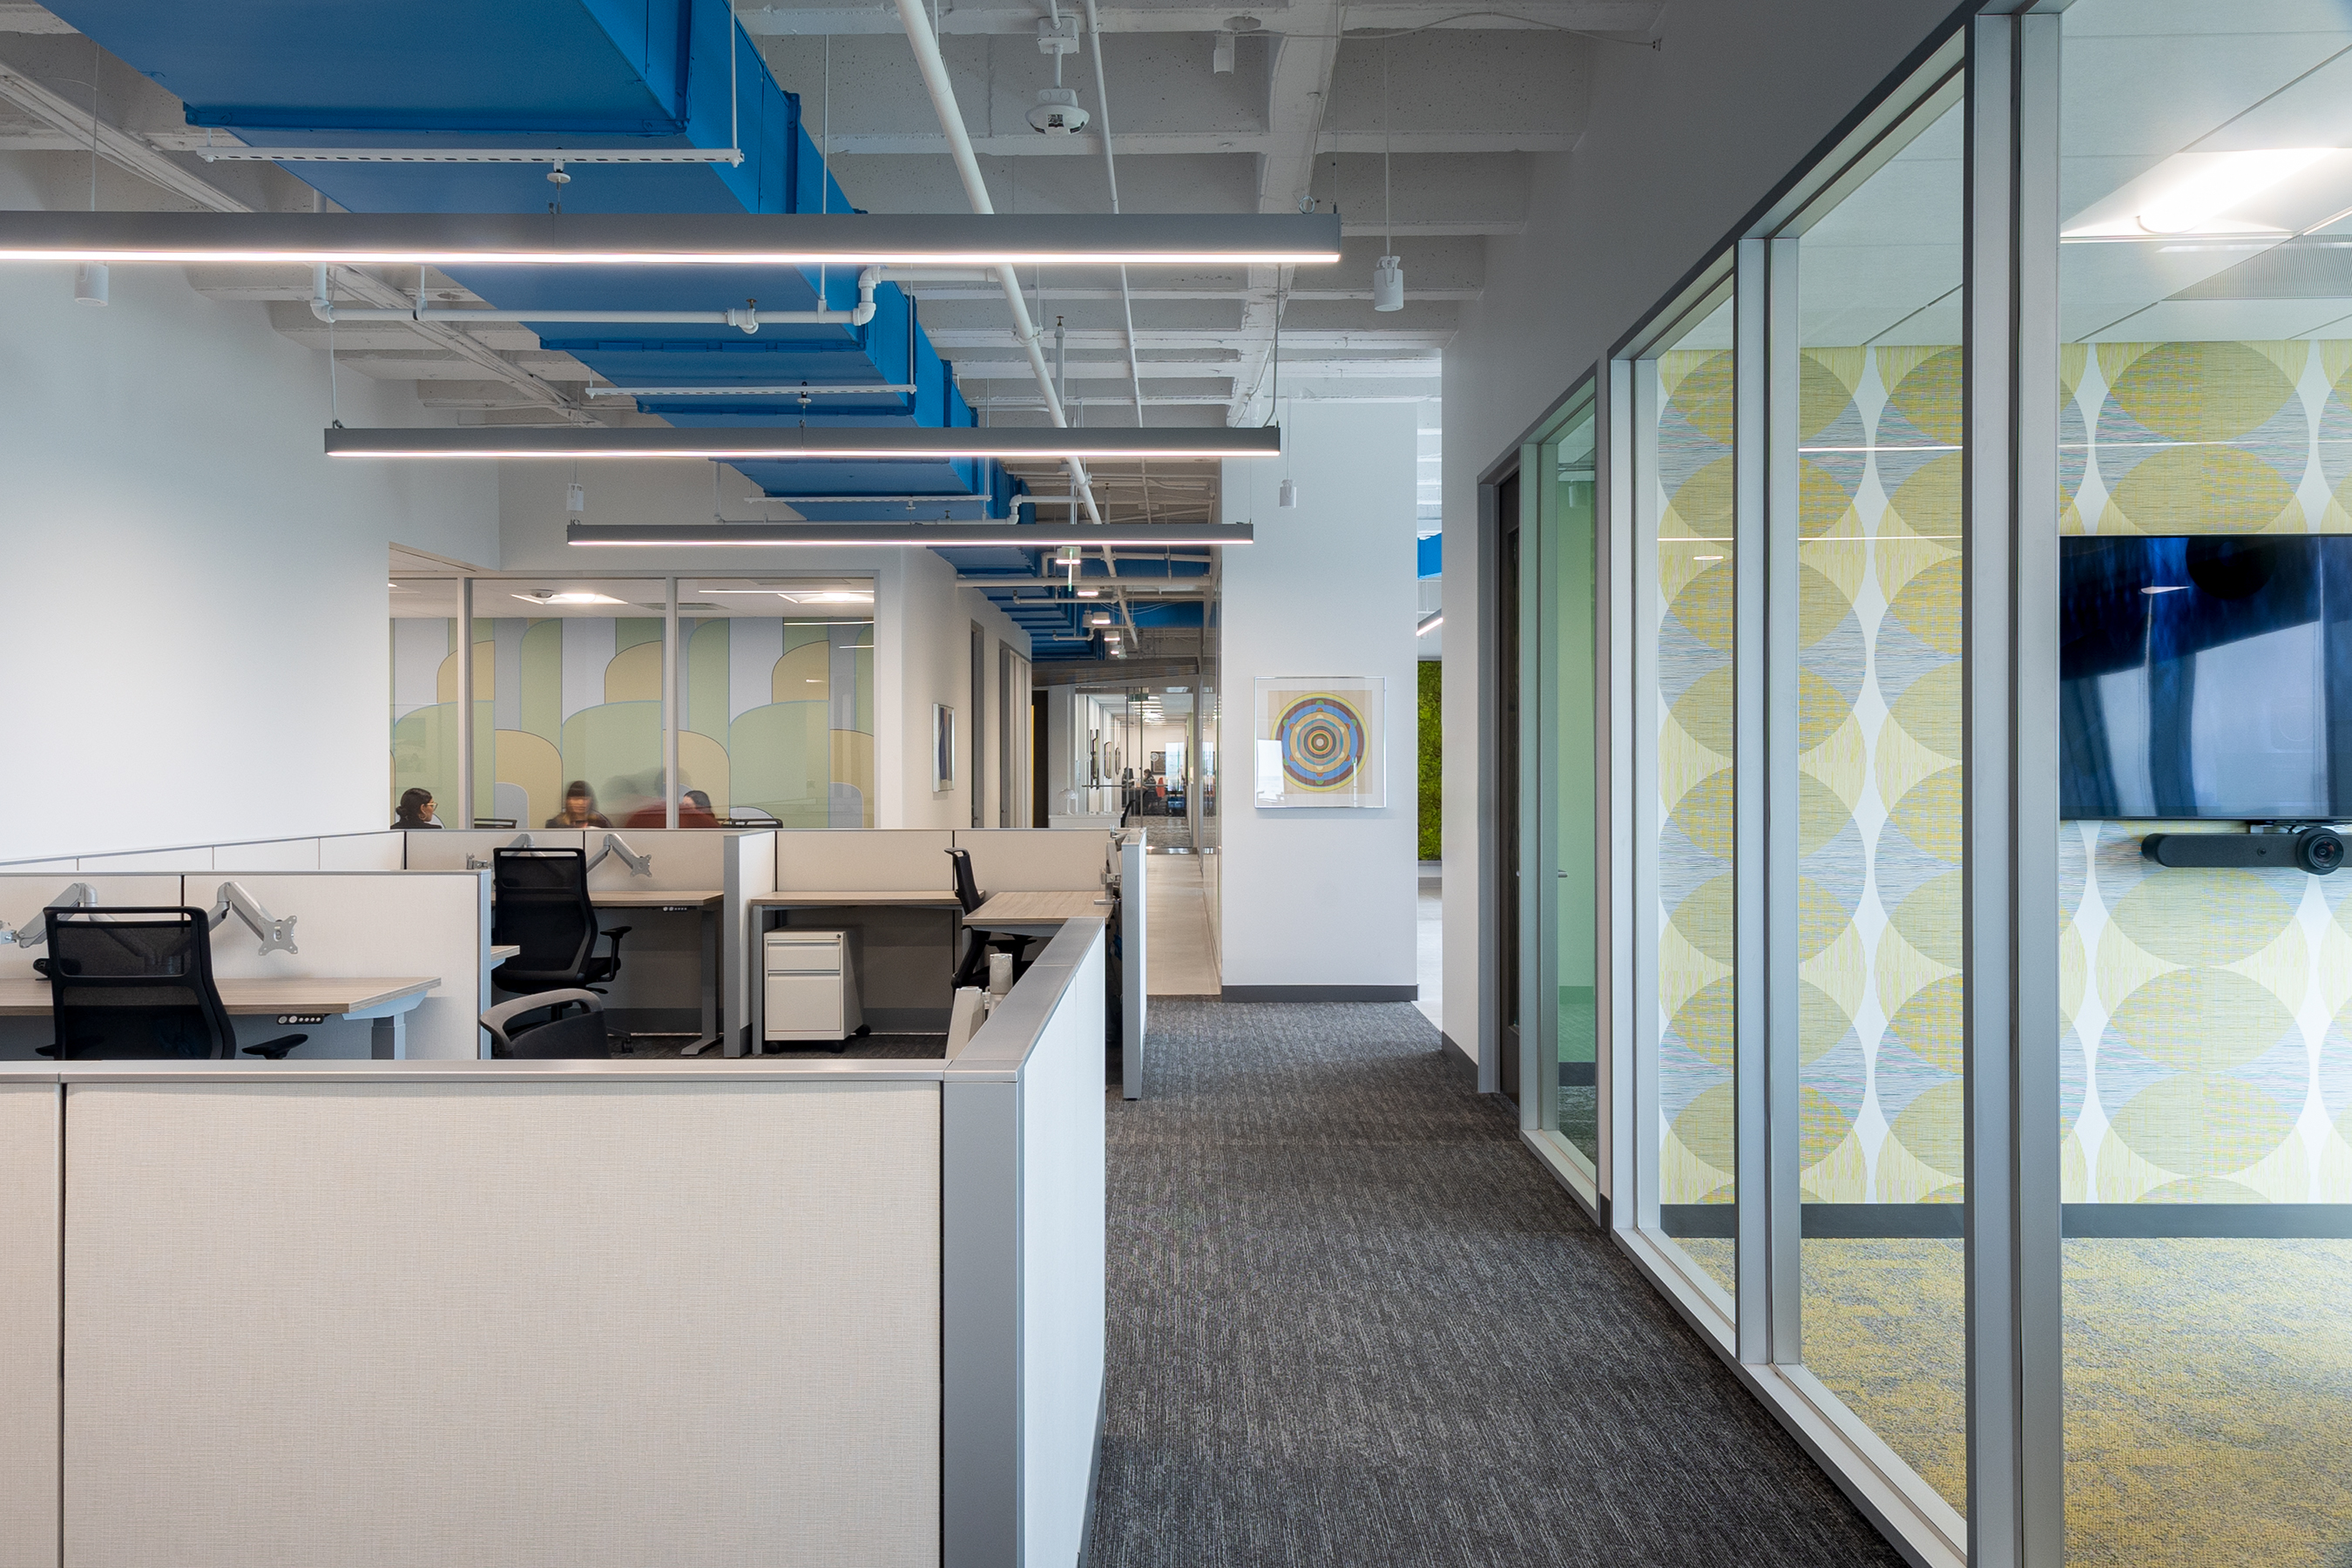 From private offices to entire headquarters, Water Cooler has a range of space options specifically designed to meet the needs of best-in-class nonprofits.